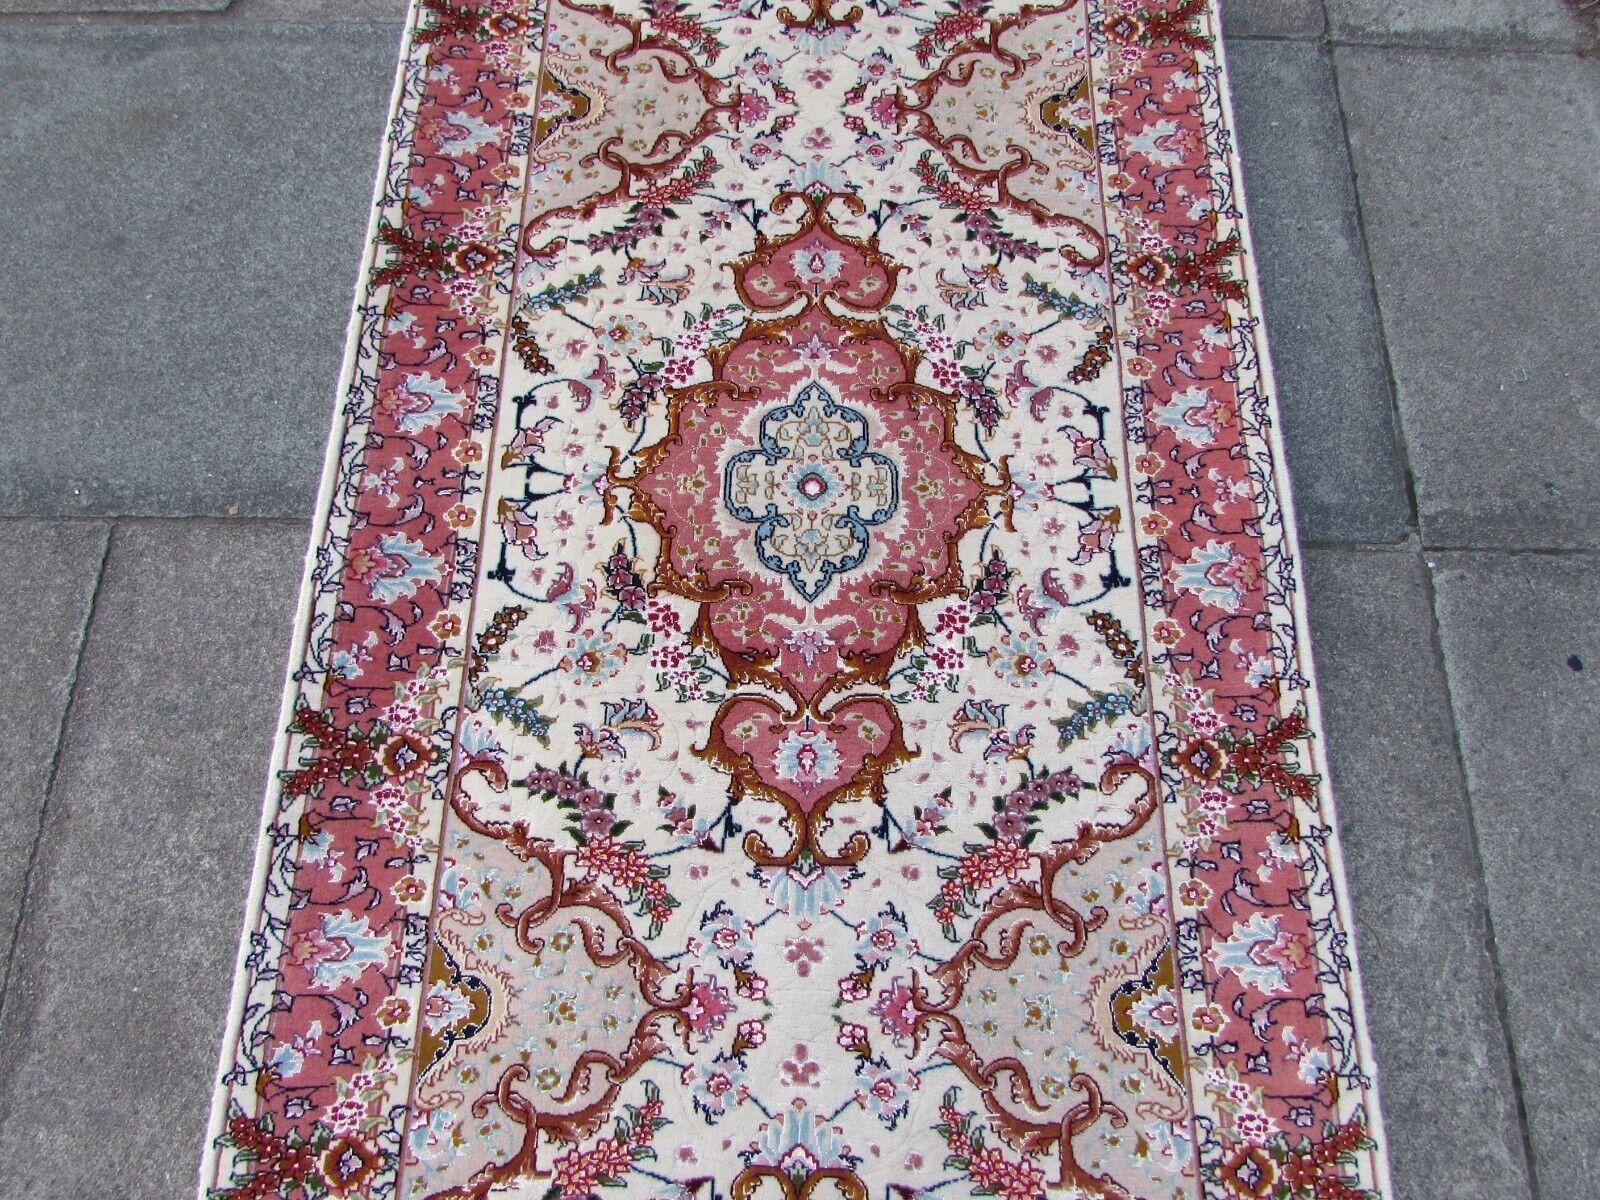 French Handmade Vintage Persian Style Tabriz Runner Silk Rug 2.9' x 9.8', 1980s, 1Q49 For Sale